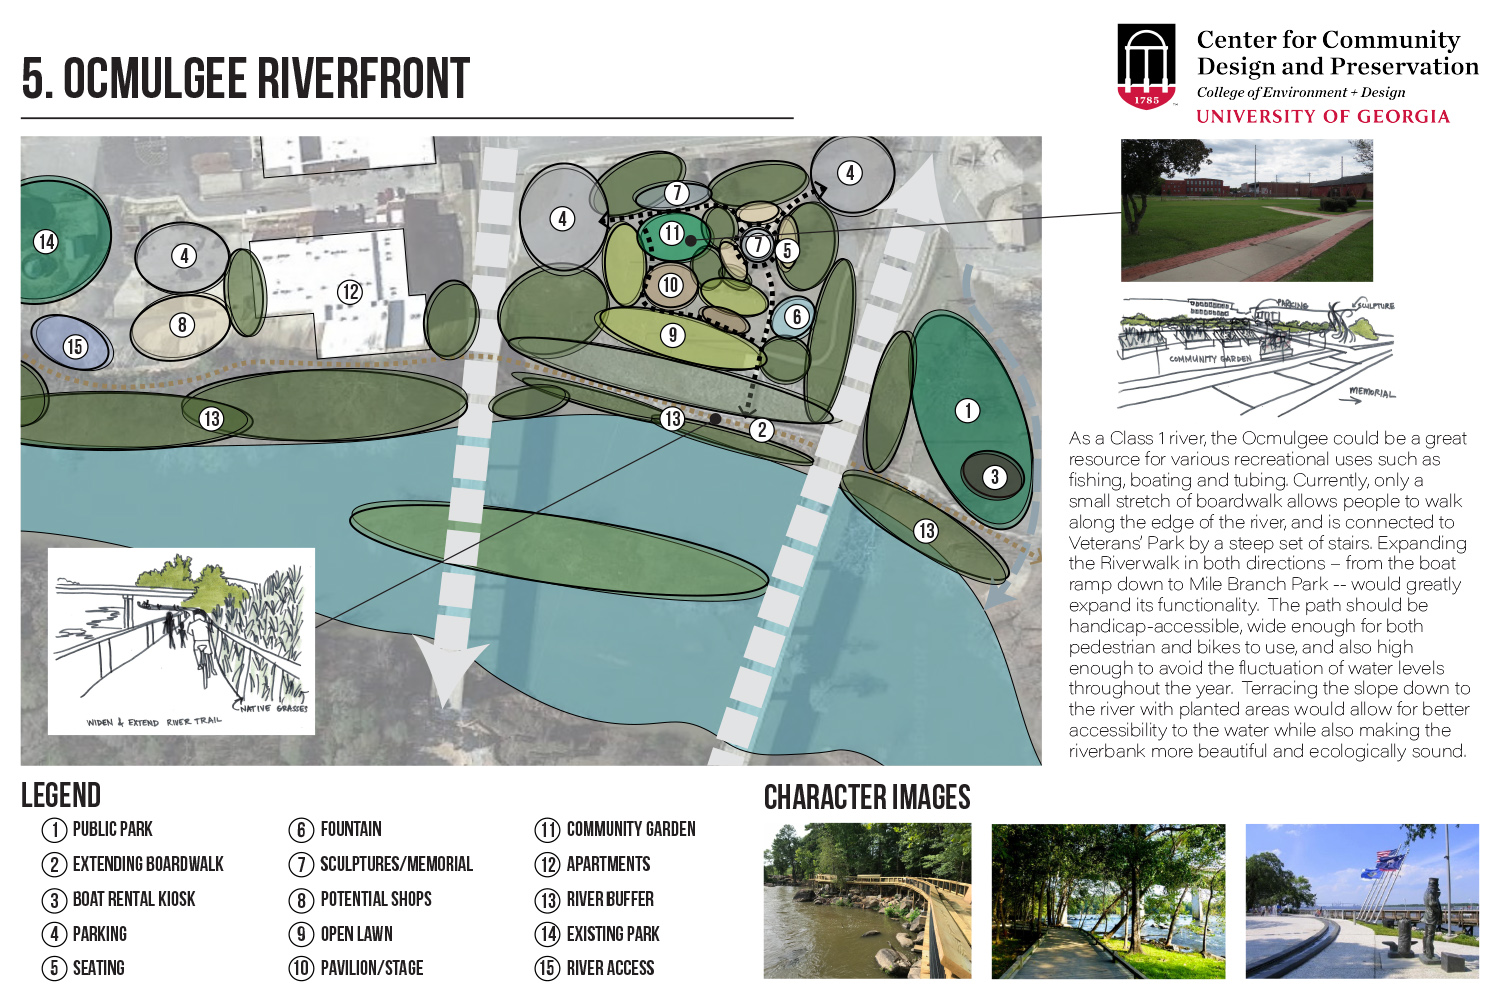 As a Class 1 river, the Ocmulgee could be a great resource for various recreational uses such as fishing , boating and tubing. Currently, only a small stretch of boardwalk allows people to walk along the edge of the river, and is connected to Veterans’ Park by a steep set of stairs. Expanding the Riverwalk in both directions – from the boat ramp down to Mile Branch Park -- would greatly expand its functionality.  The path should be handicap-accessible, wide enough for both pedestrian and bikes to use, and also high enough to avoid the fluctuation of water levels throughout the year.  Terracing the slope down to the river with planted areas would allow for better accessibility to the water while also making the riverbank more beautiful and ecologically sound.